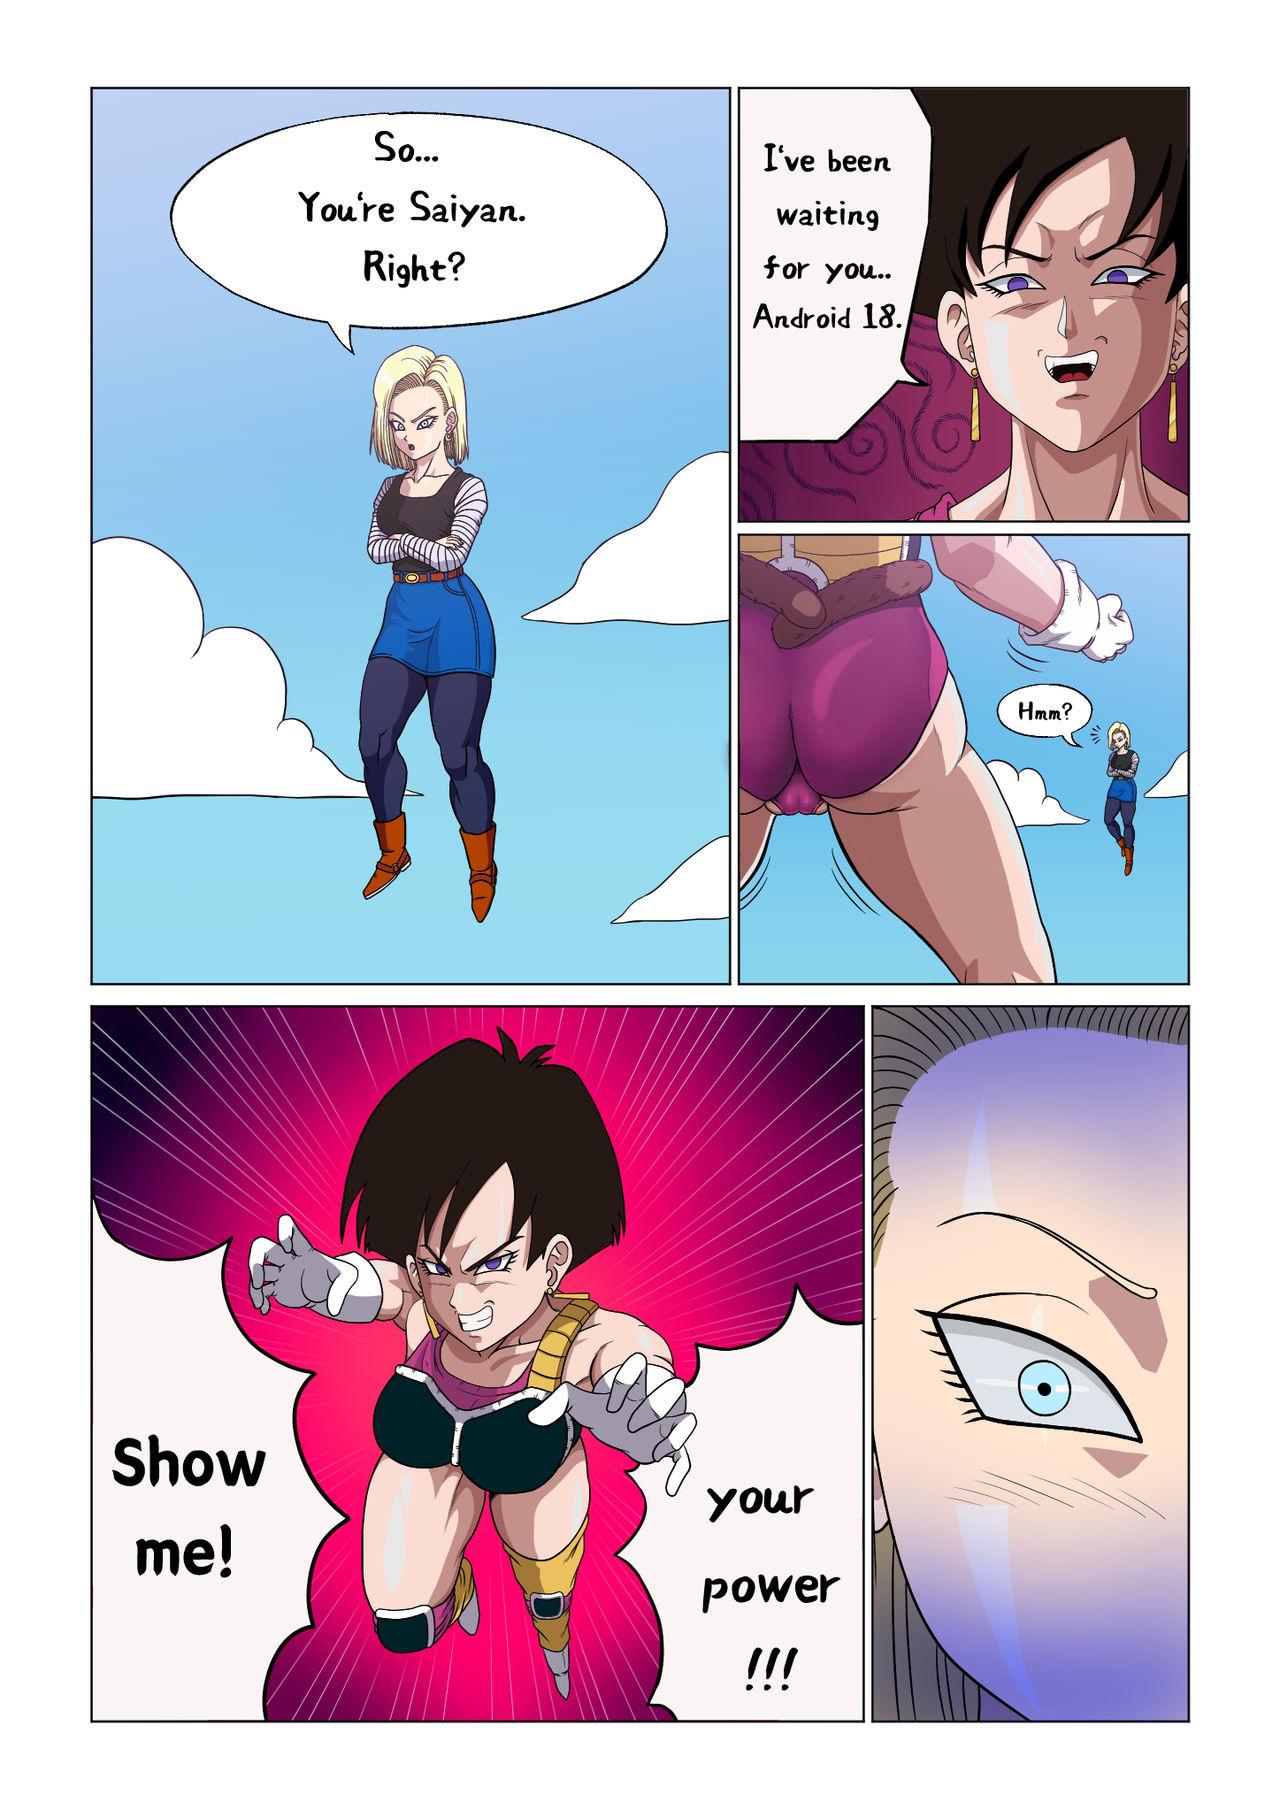 Android 18 vs Baby 1